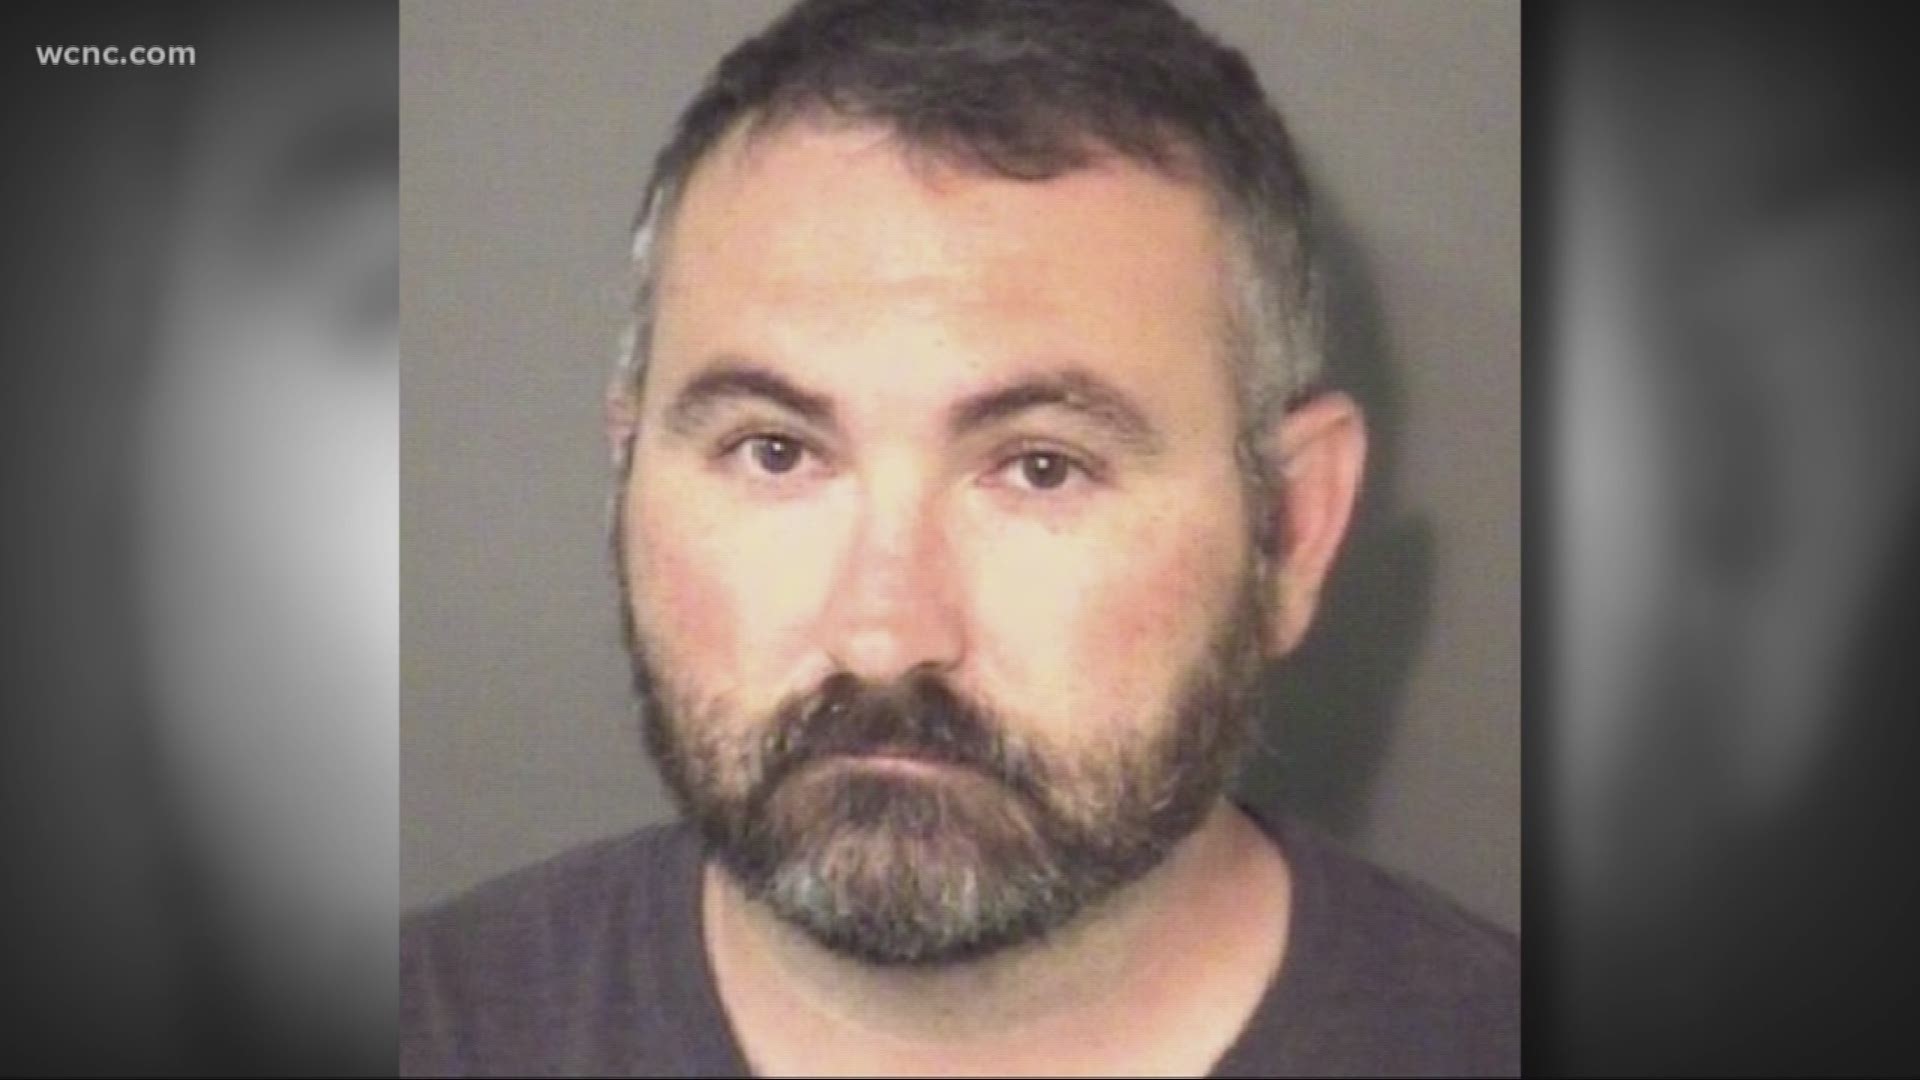 A former local teacher is facing 16 felony charges, including inappropriate behavior.